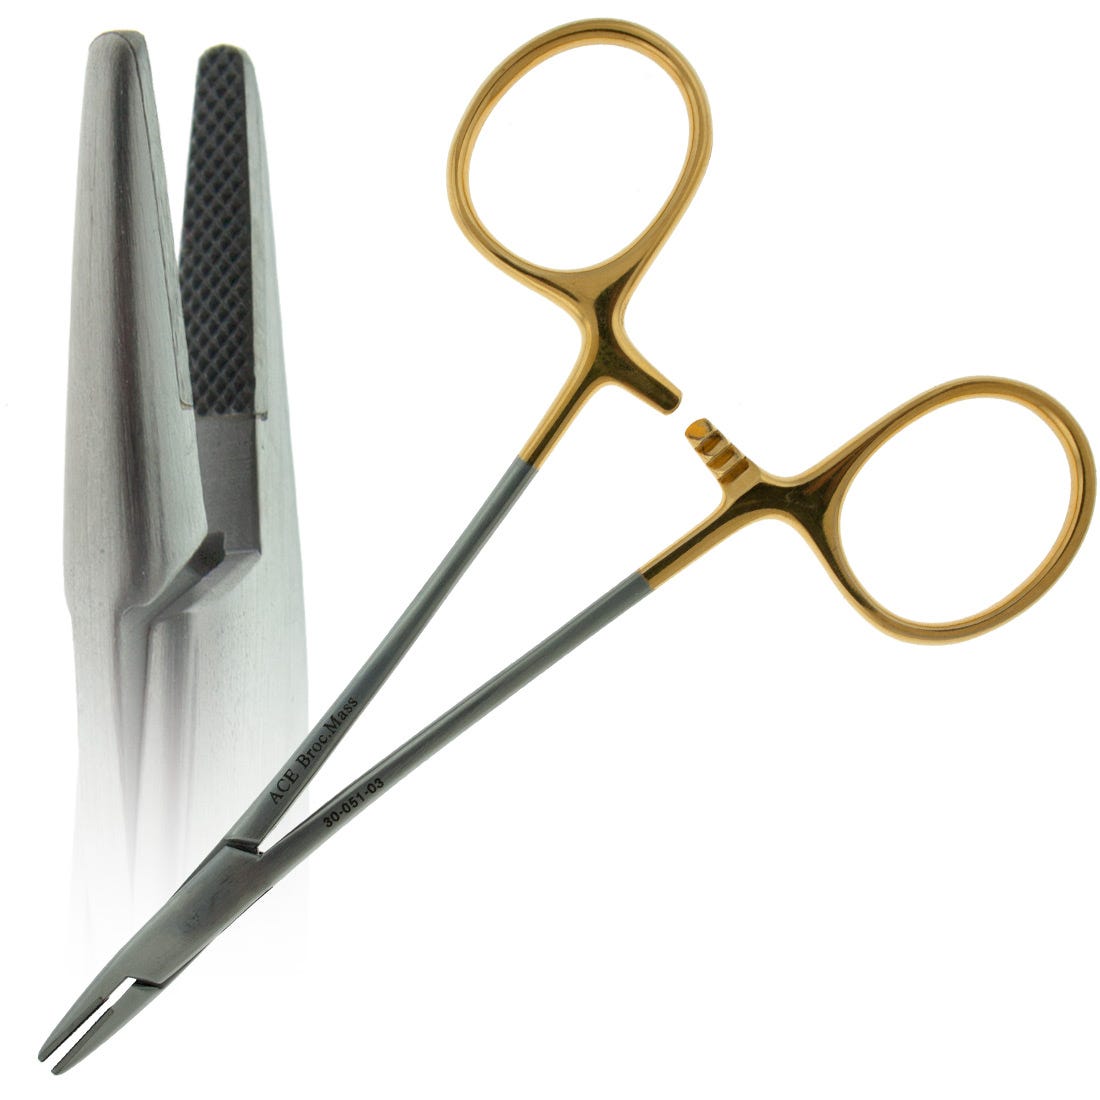 ACE Webster Needle Holder, Serrated, tungsten carbide tips